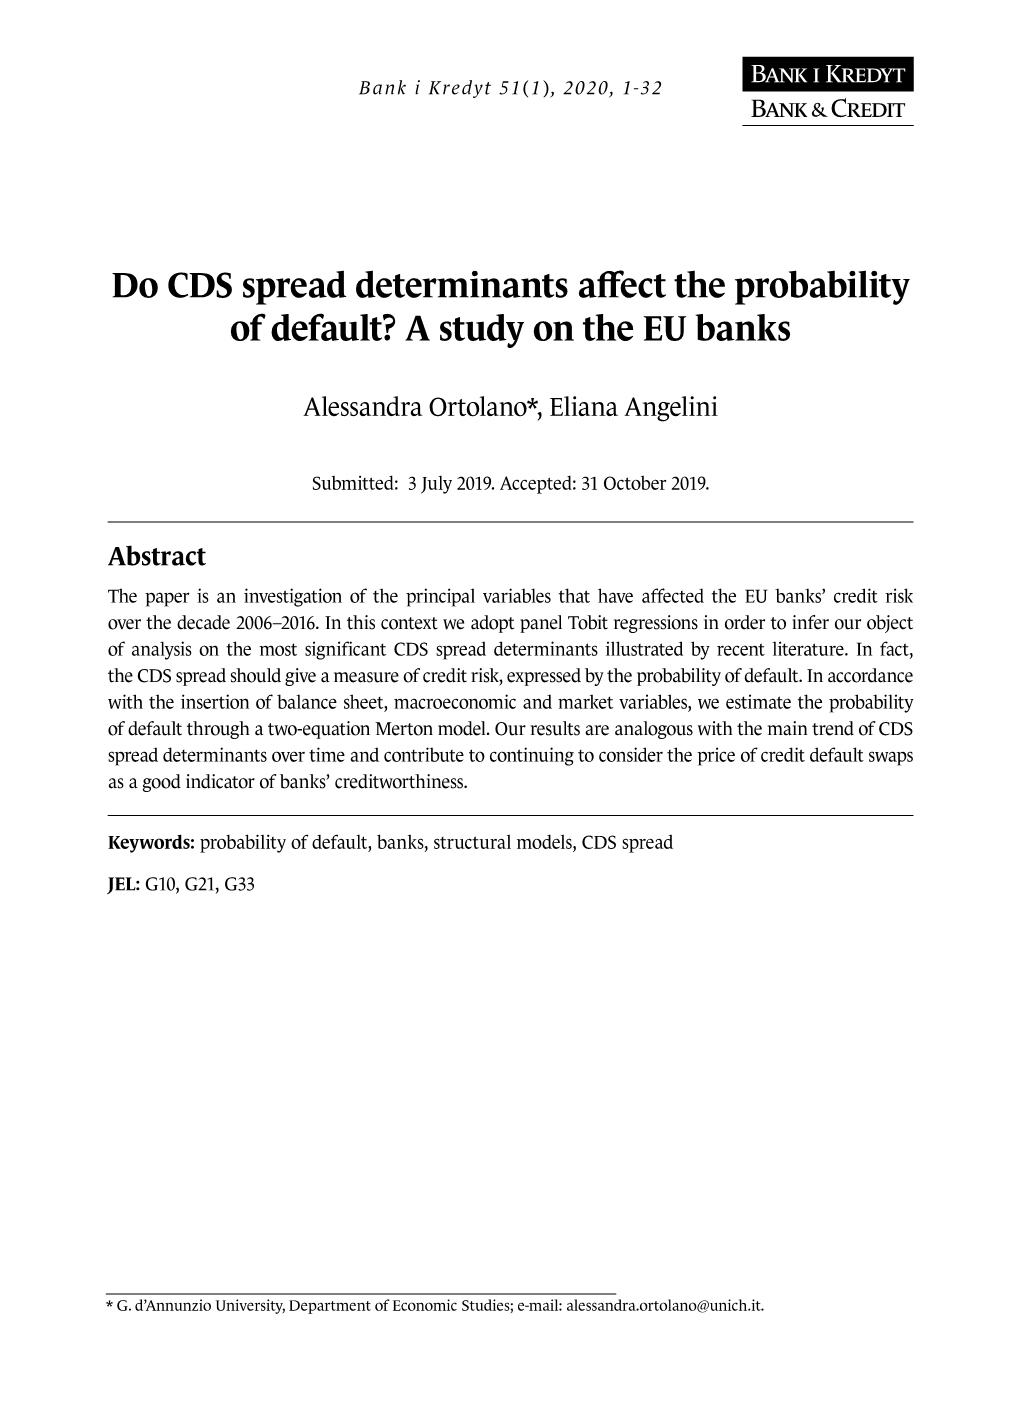 Do CDS Spread Determinants Affect the Probability of Default? a Study on the EU Banks